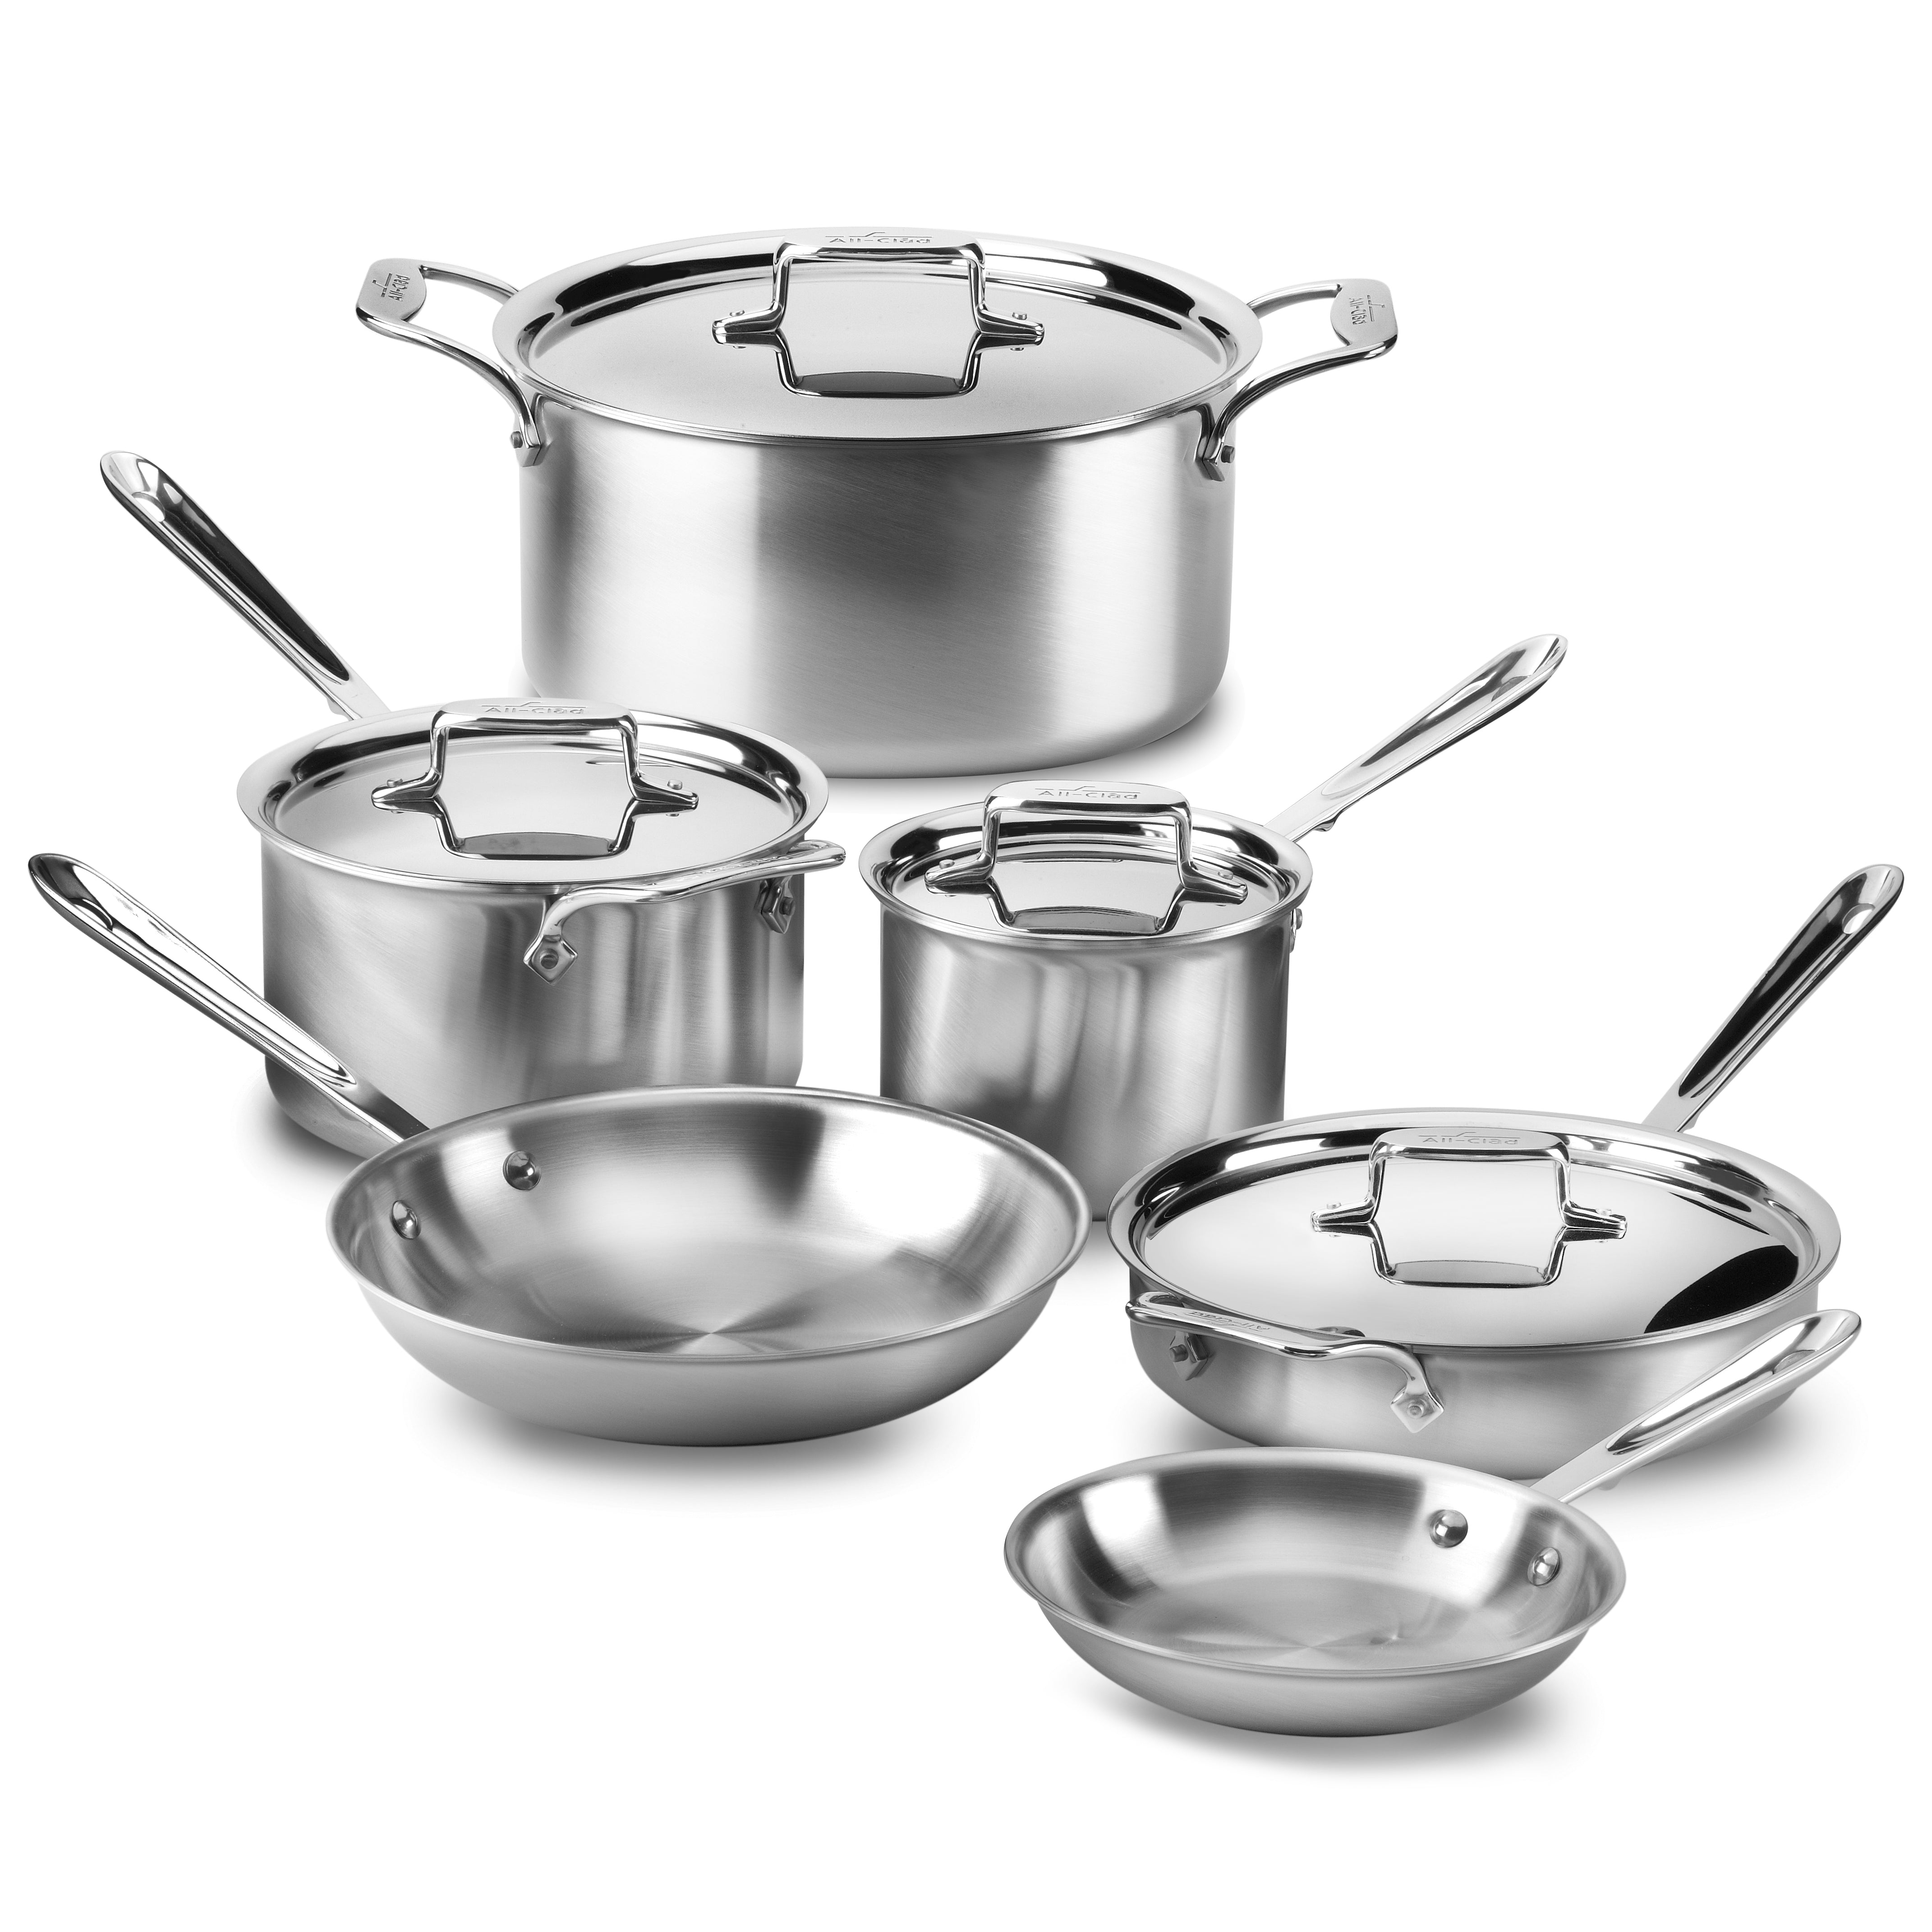 All-Clad d5 Cookware Set - 10 Piece Brushed Stainless Steel